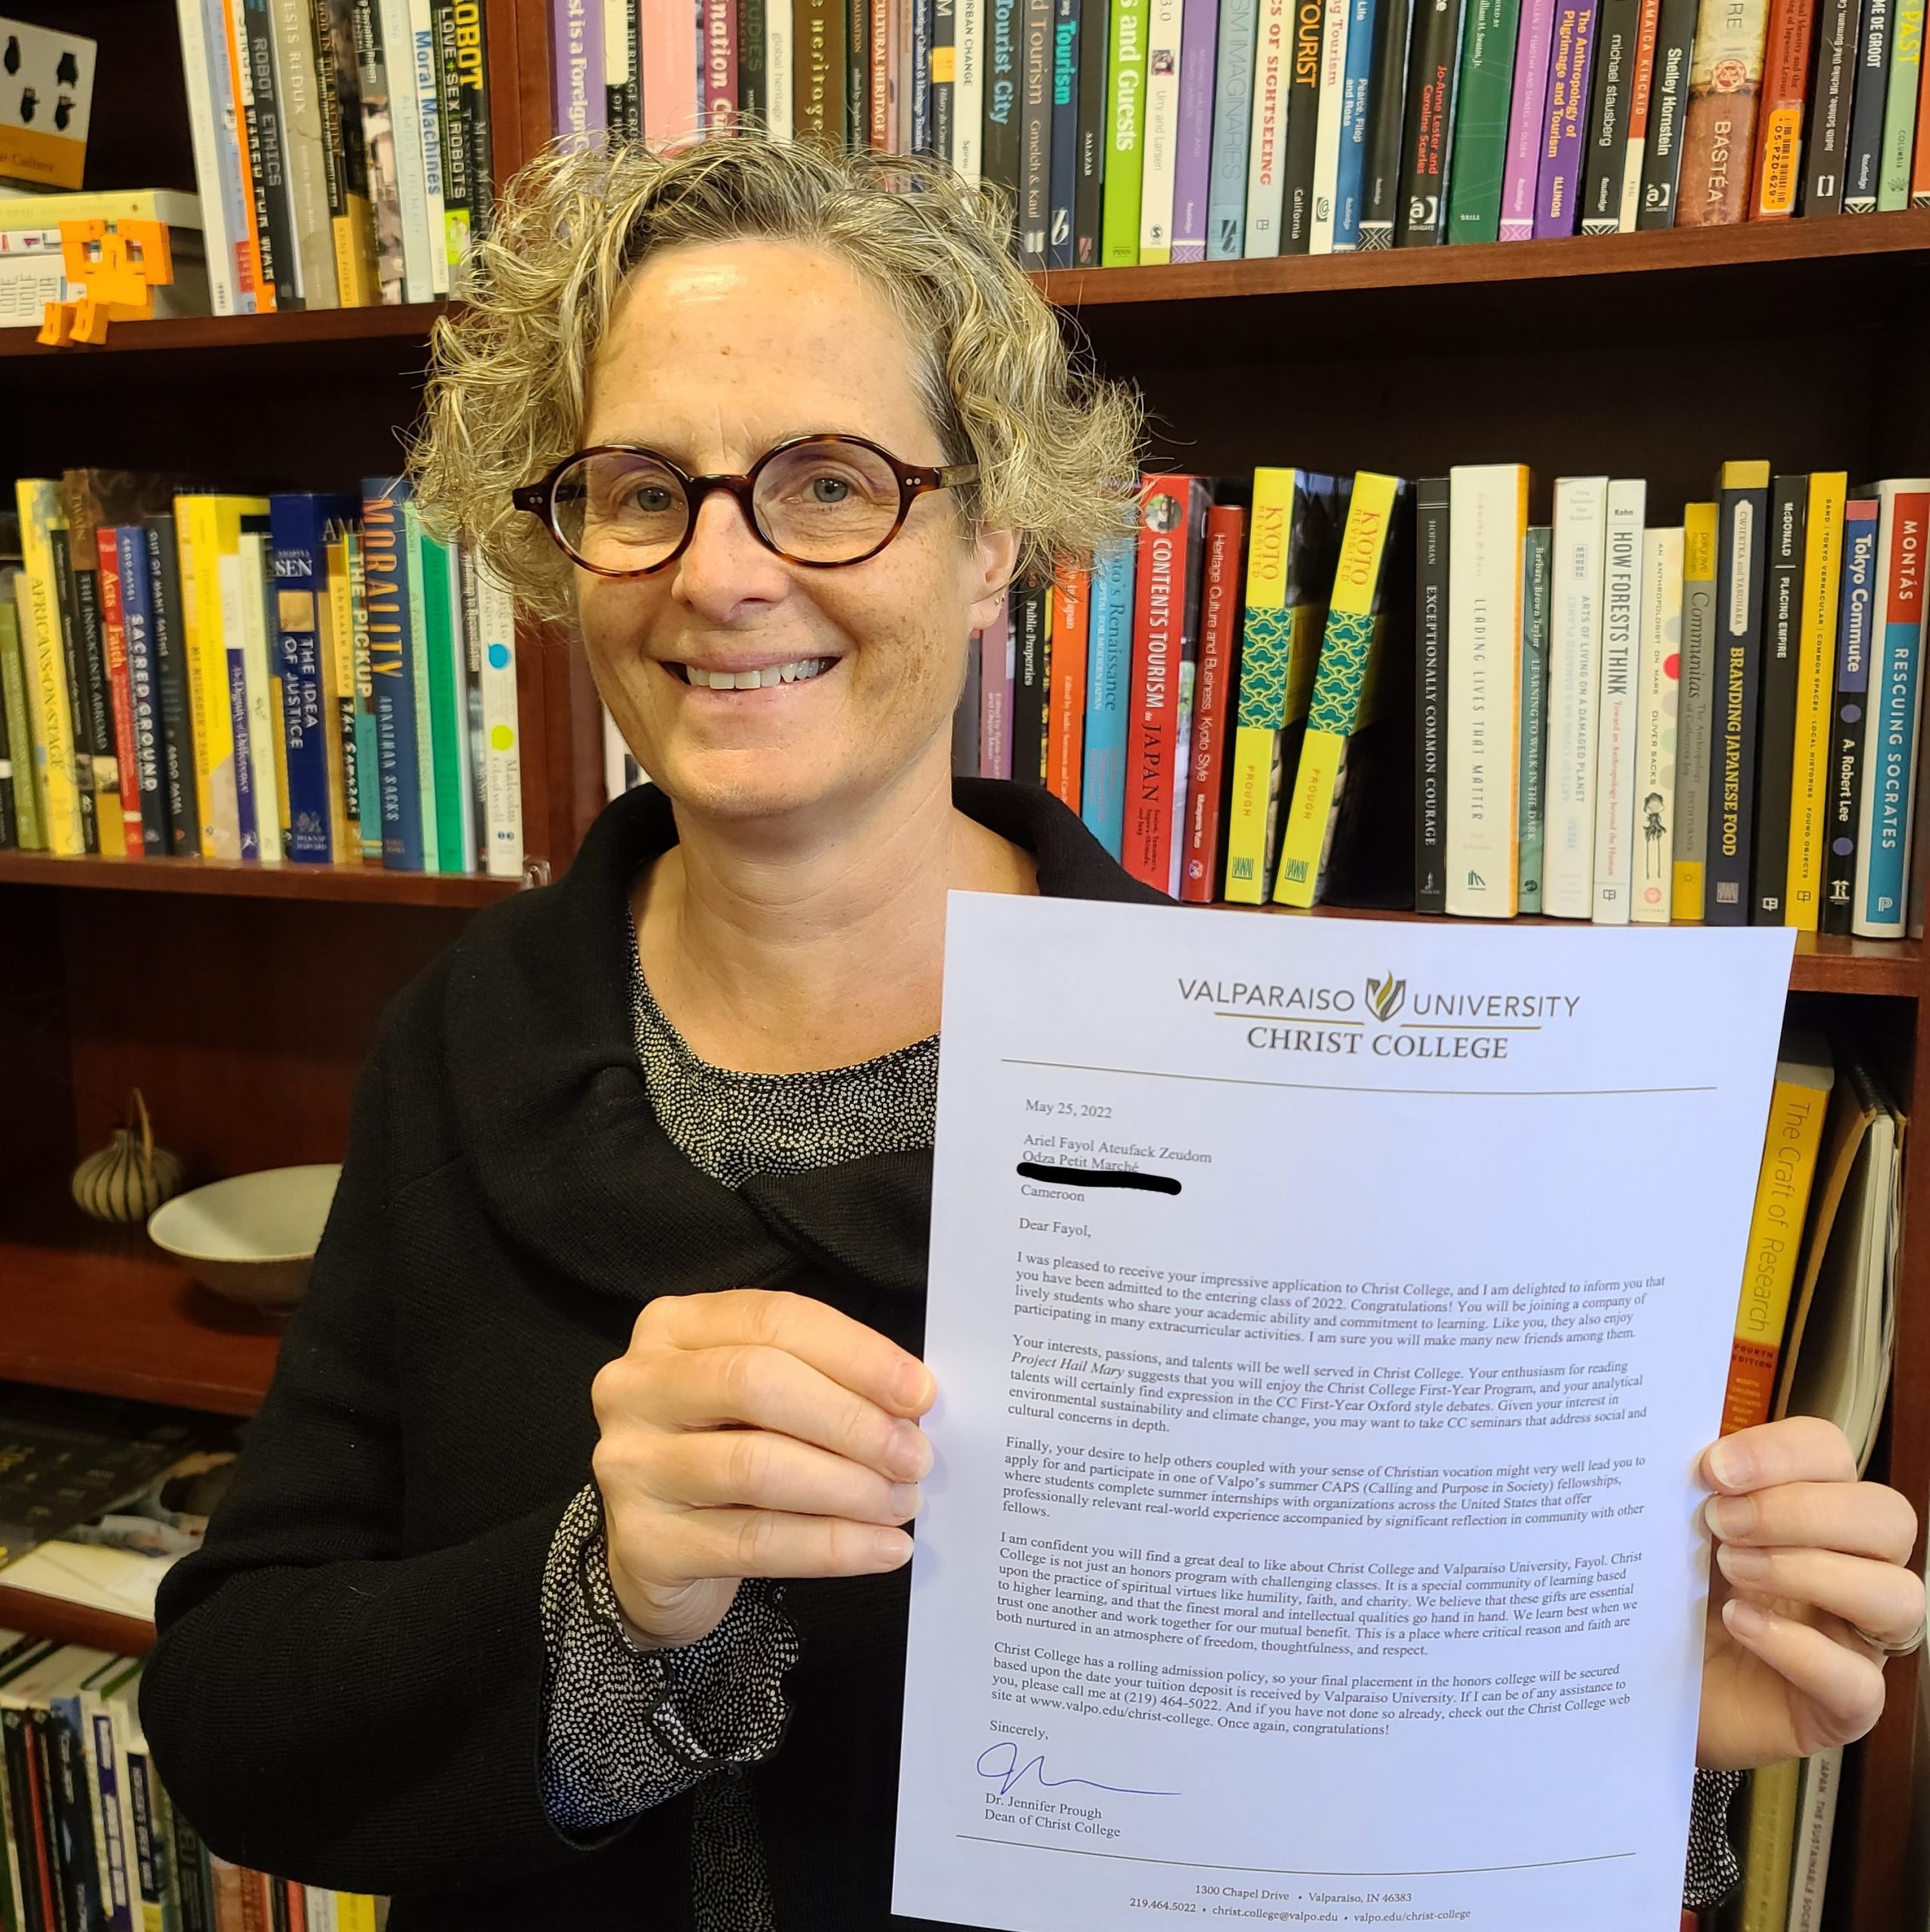 Jennifer Prough ‘91, Ph.D., dean of Christ College — The Honors College and professor of humanities and East Asian studies, smiling and holding up Fayol’s application.